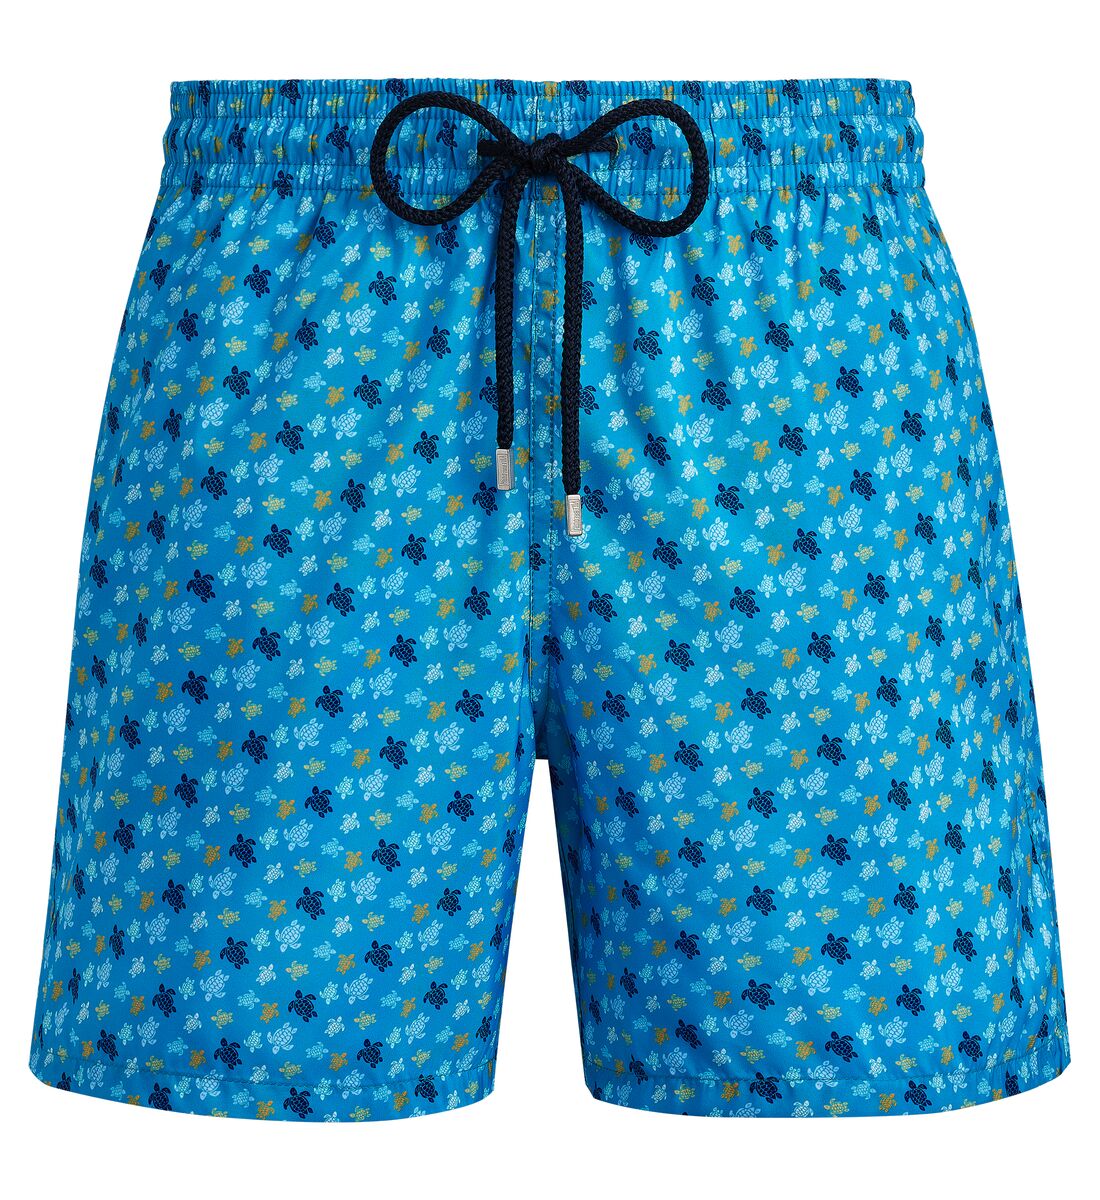 MEN ULTRA-LIGHT AND PACKABLE SWIM TRUNKS MICRO RONDE DES TORTUES RAINBOW